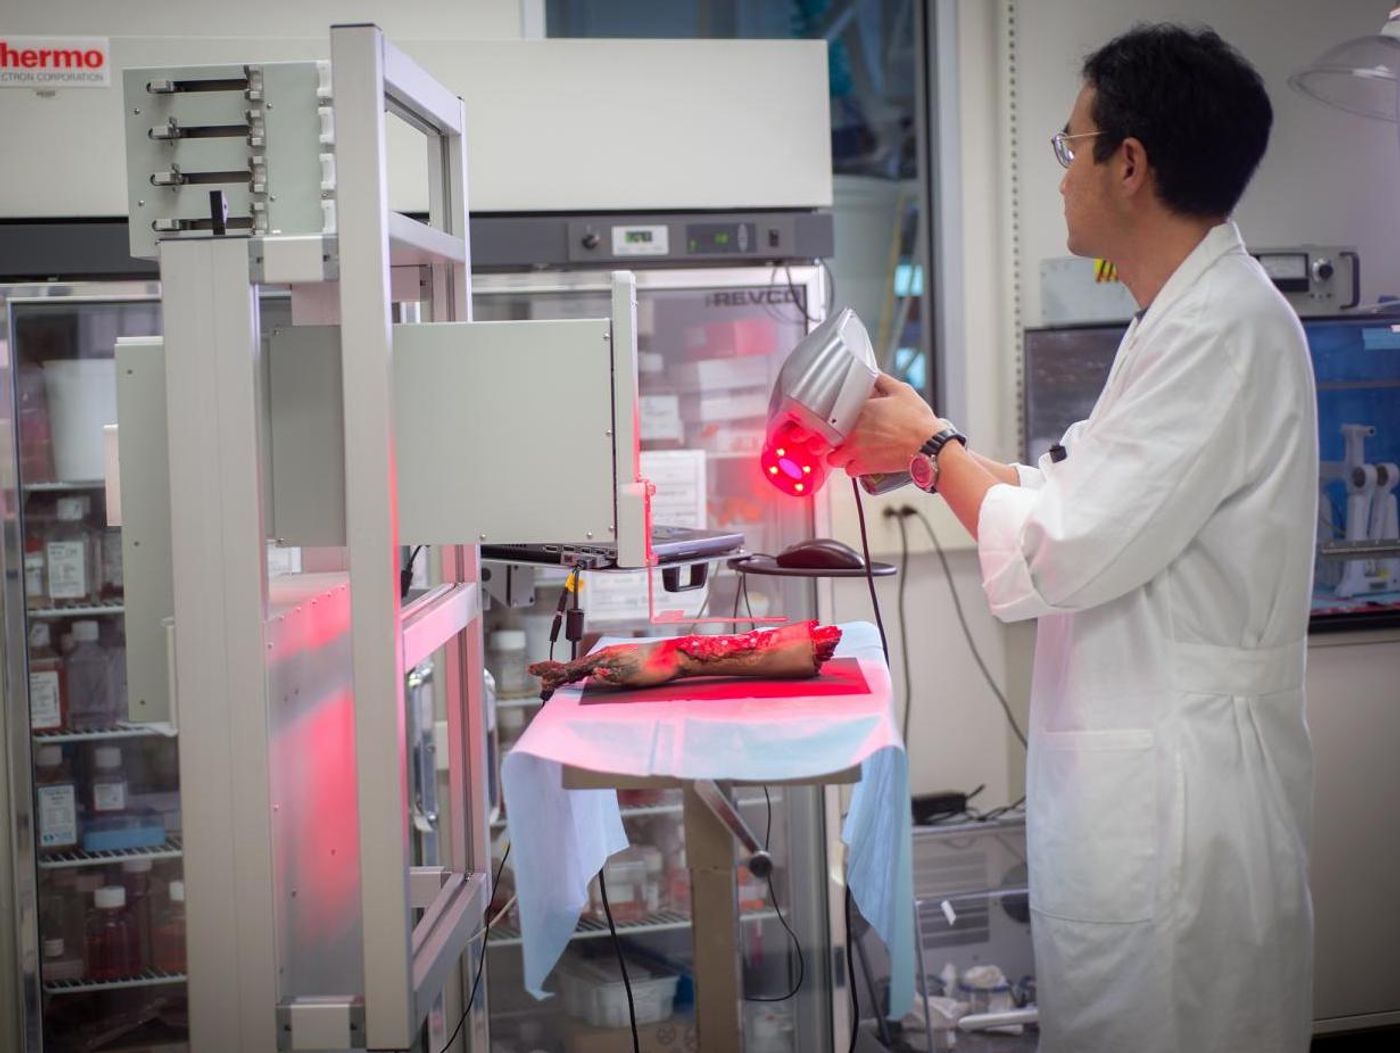 A WFIRM technician operates the mobile bio printer for skin printing on a limb demo./ Credit: WFIRM Photo